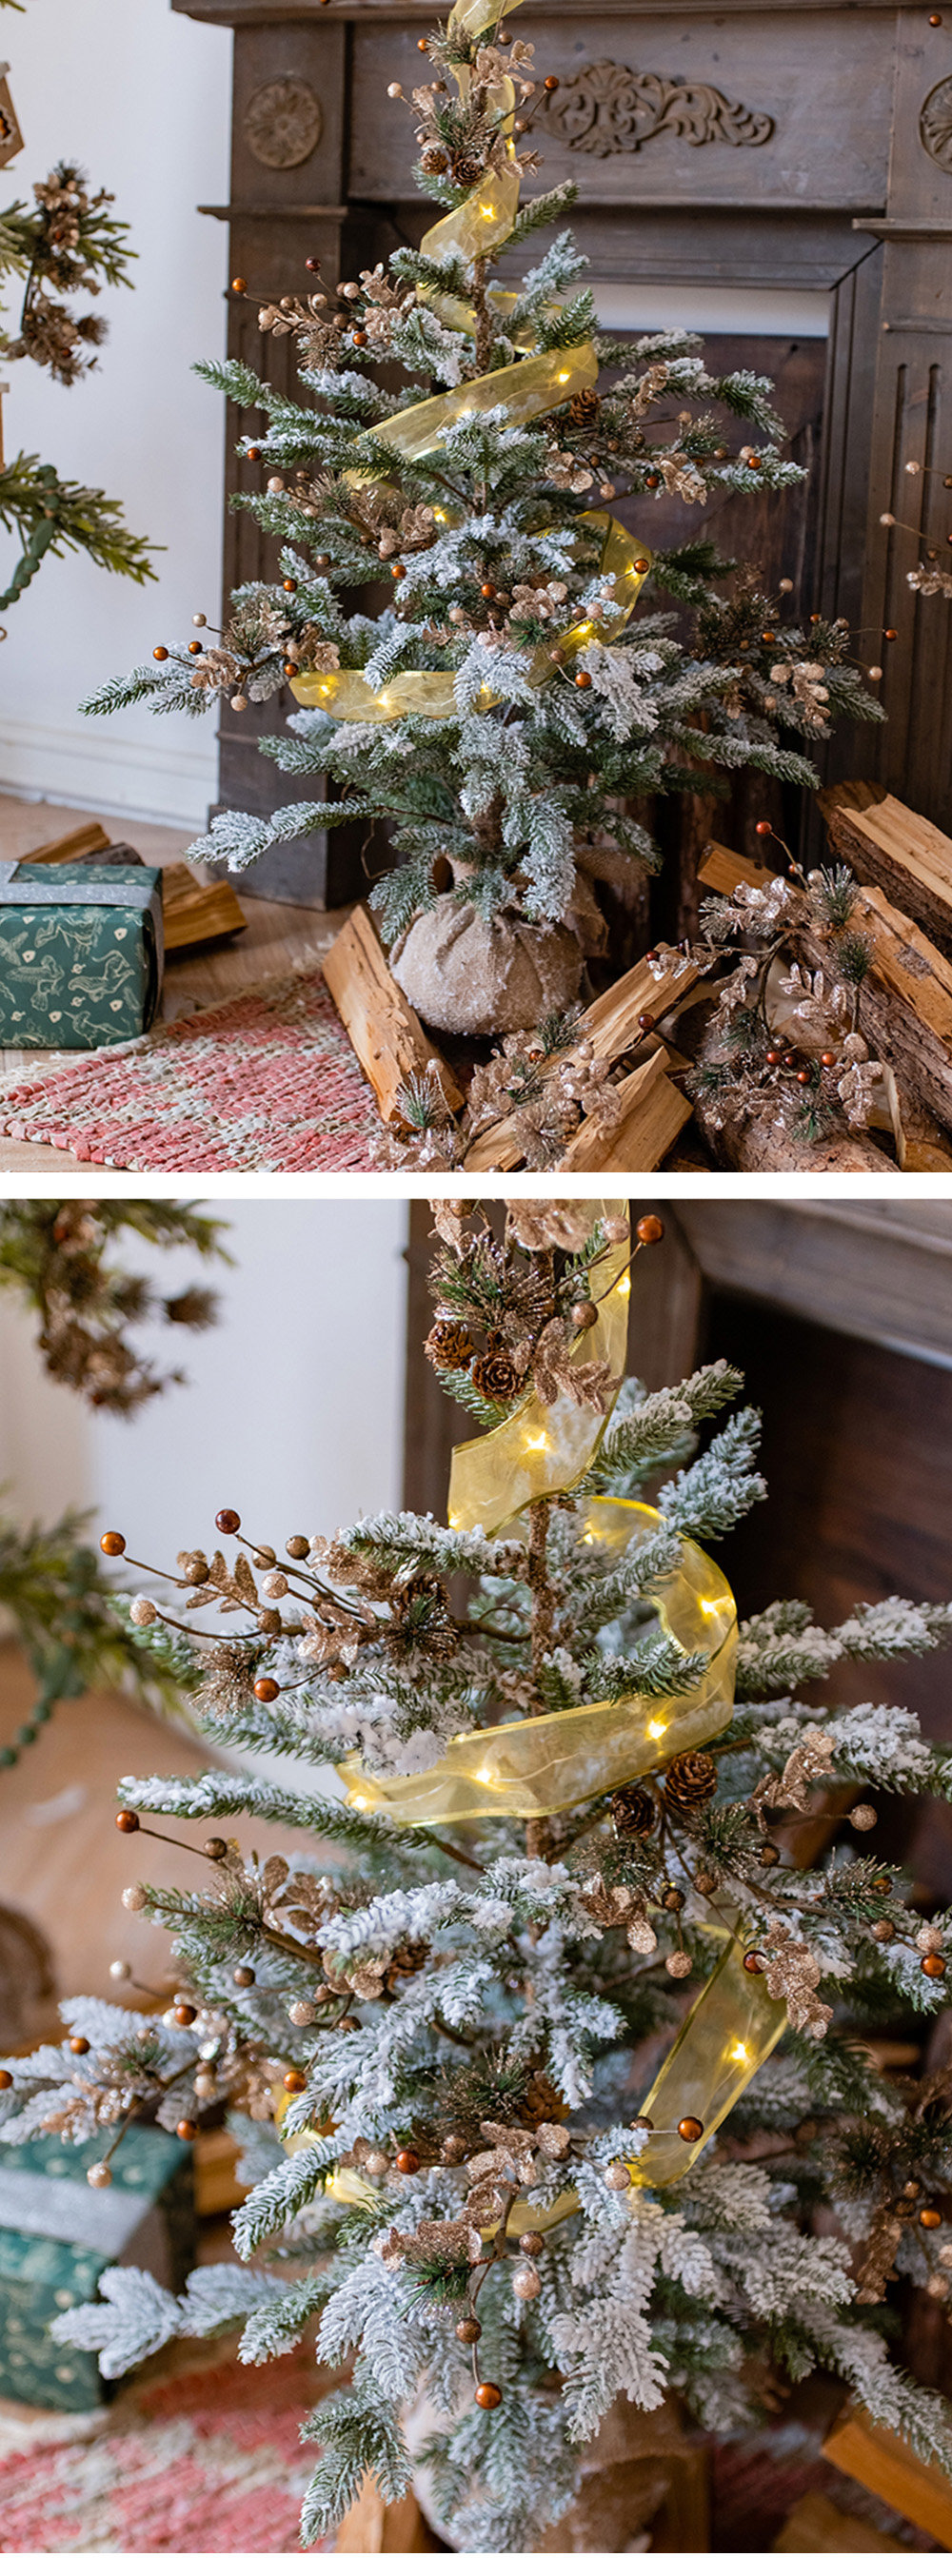 Pine Cones Themed Christmas Decorations from Apollo Box